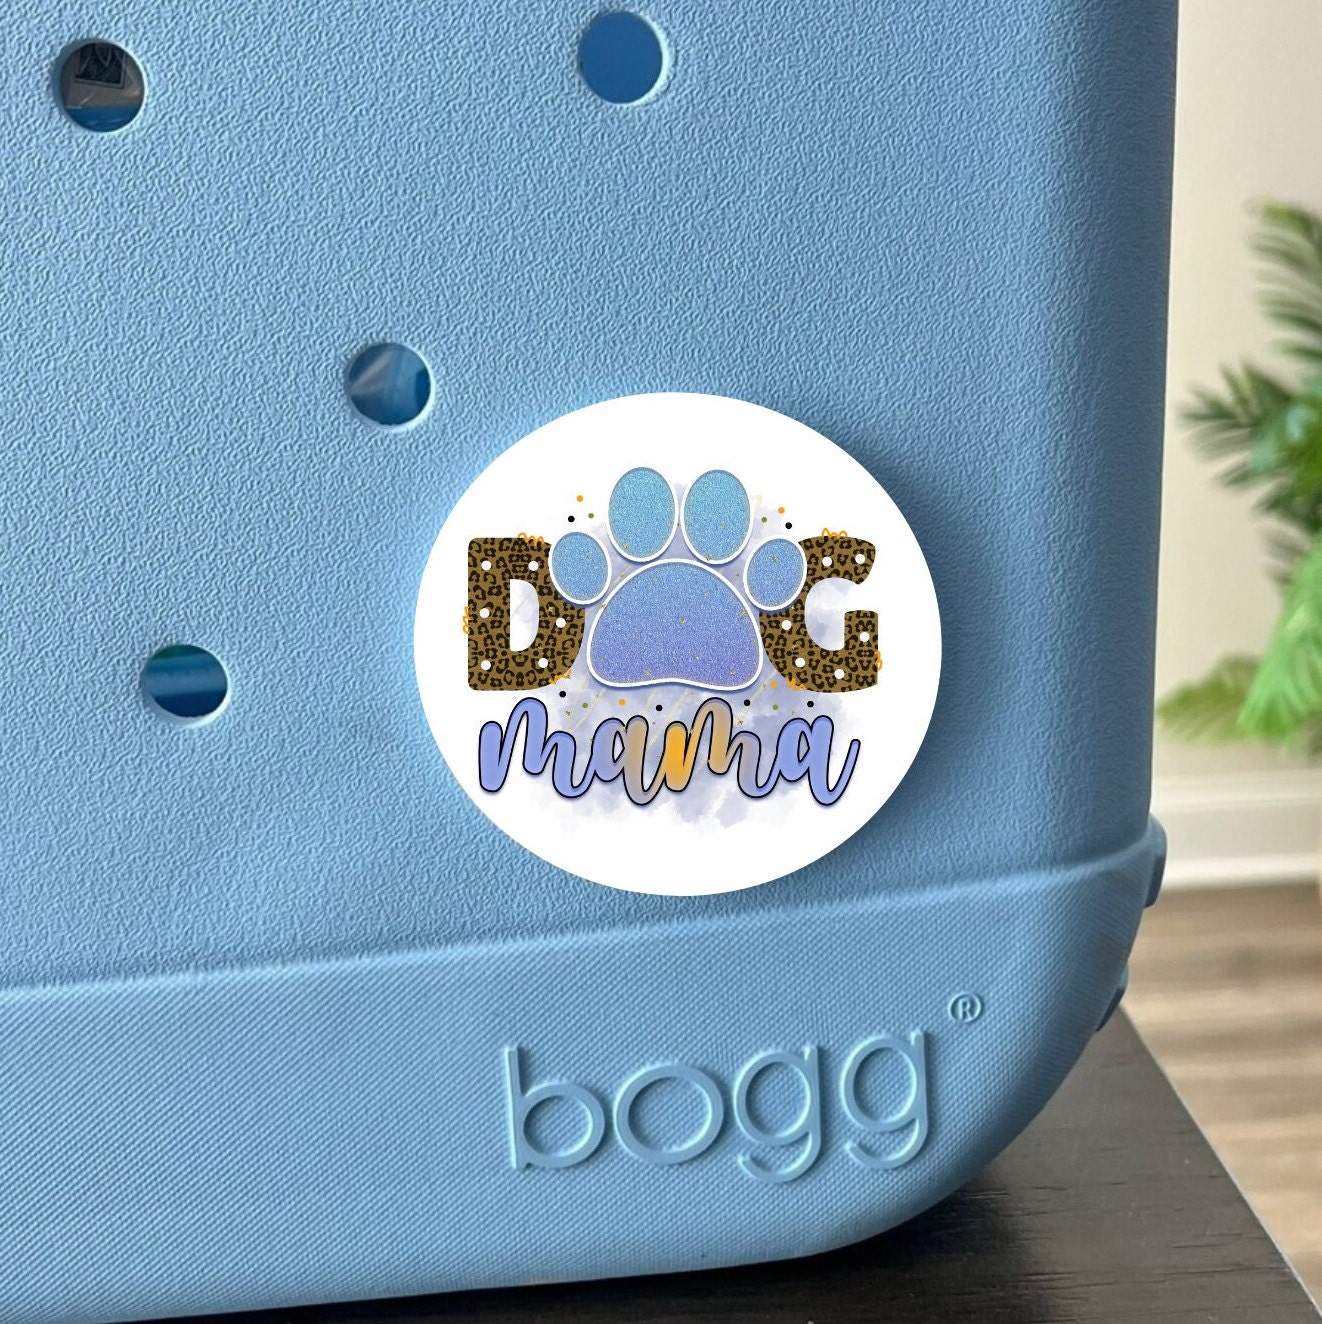 Bogg Bag - We can't get enough of dog's in Boggs. #Repost